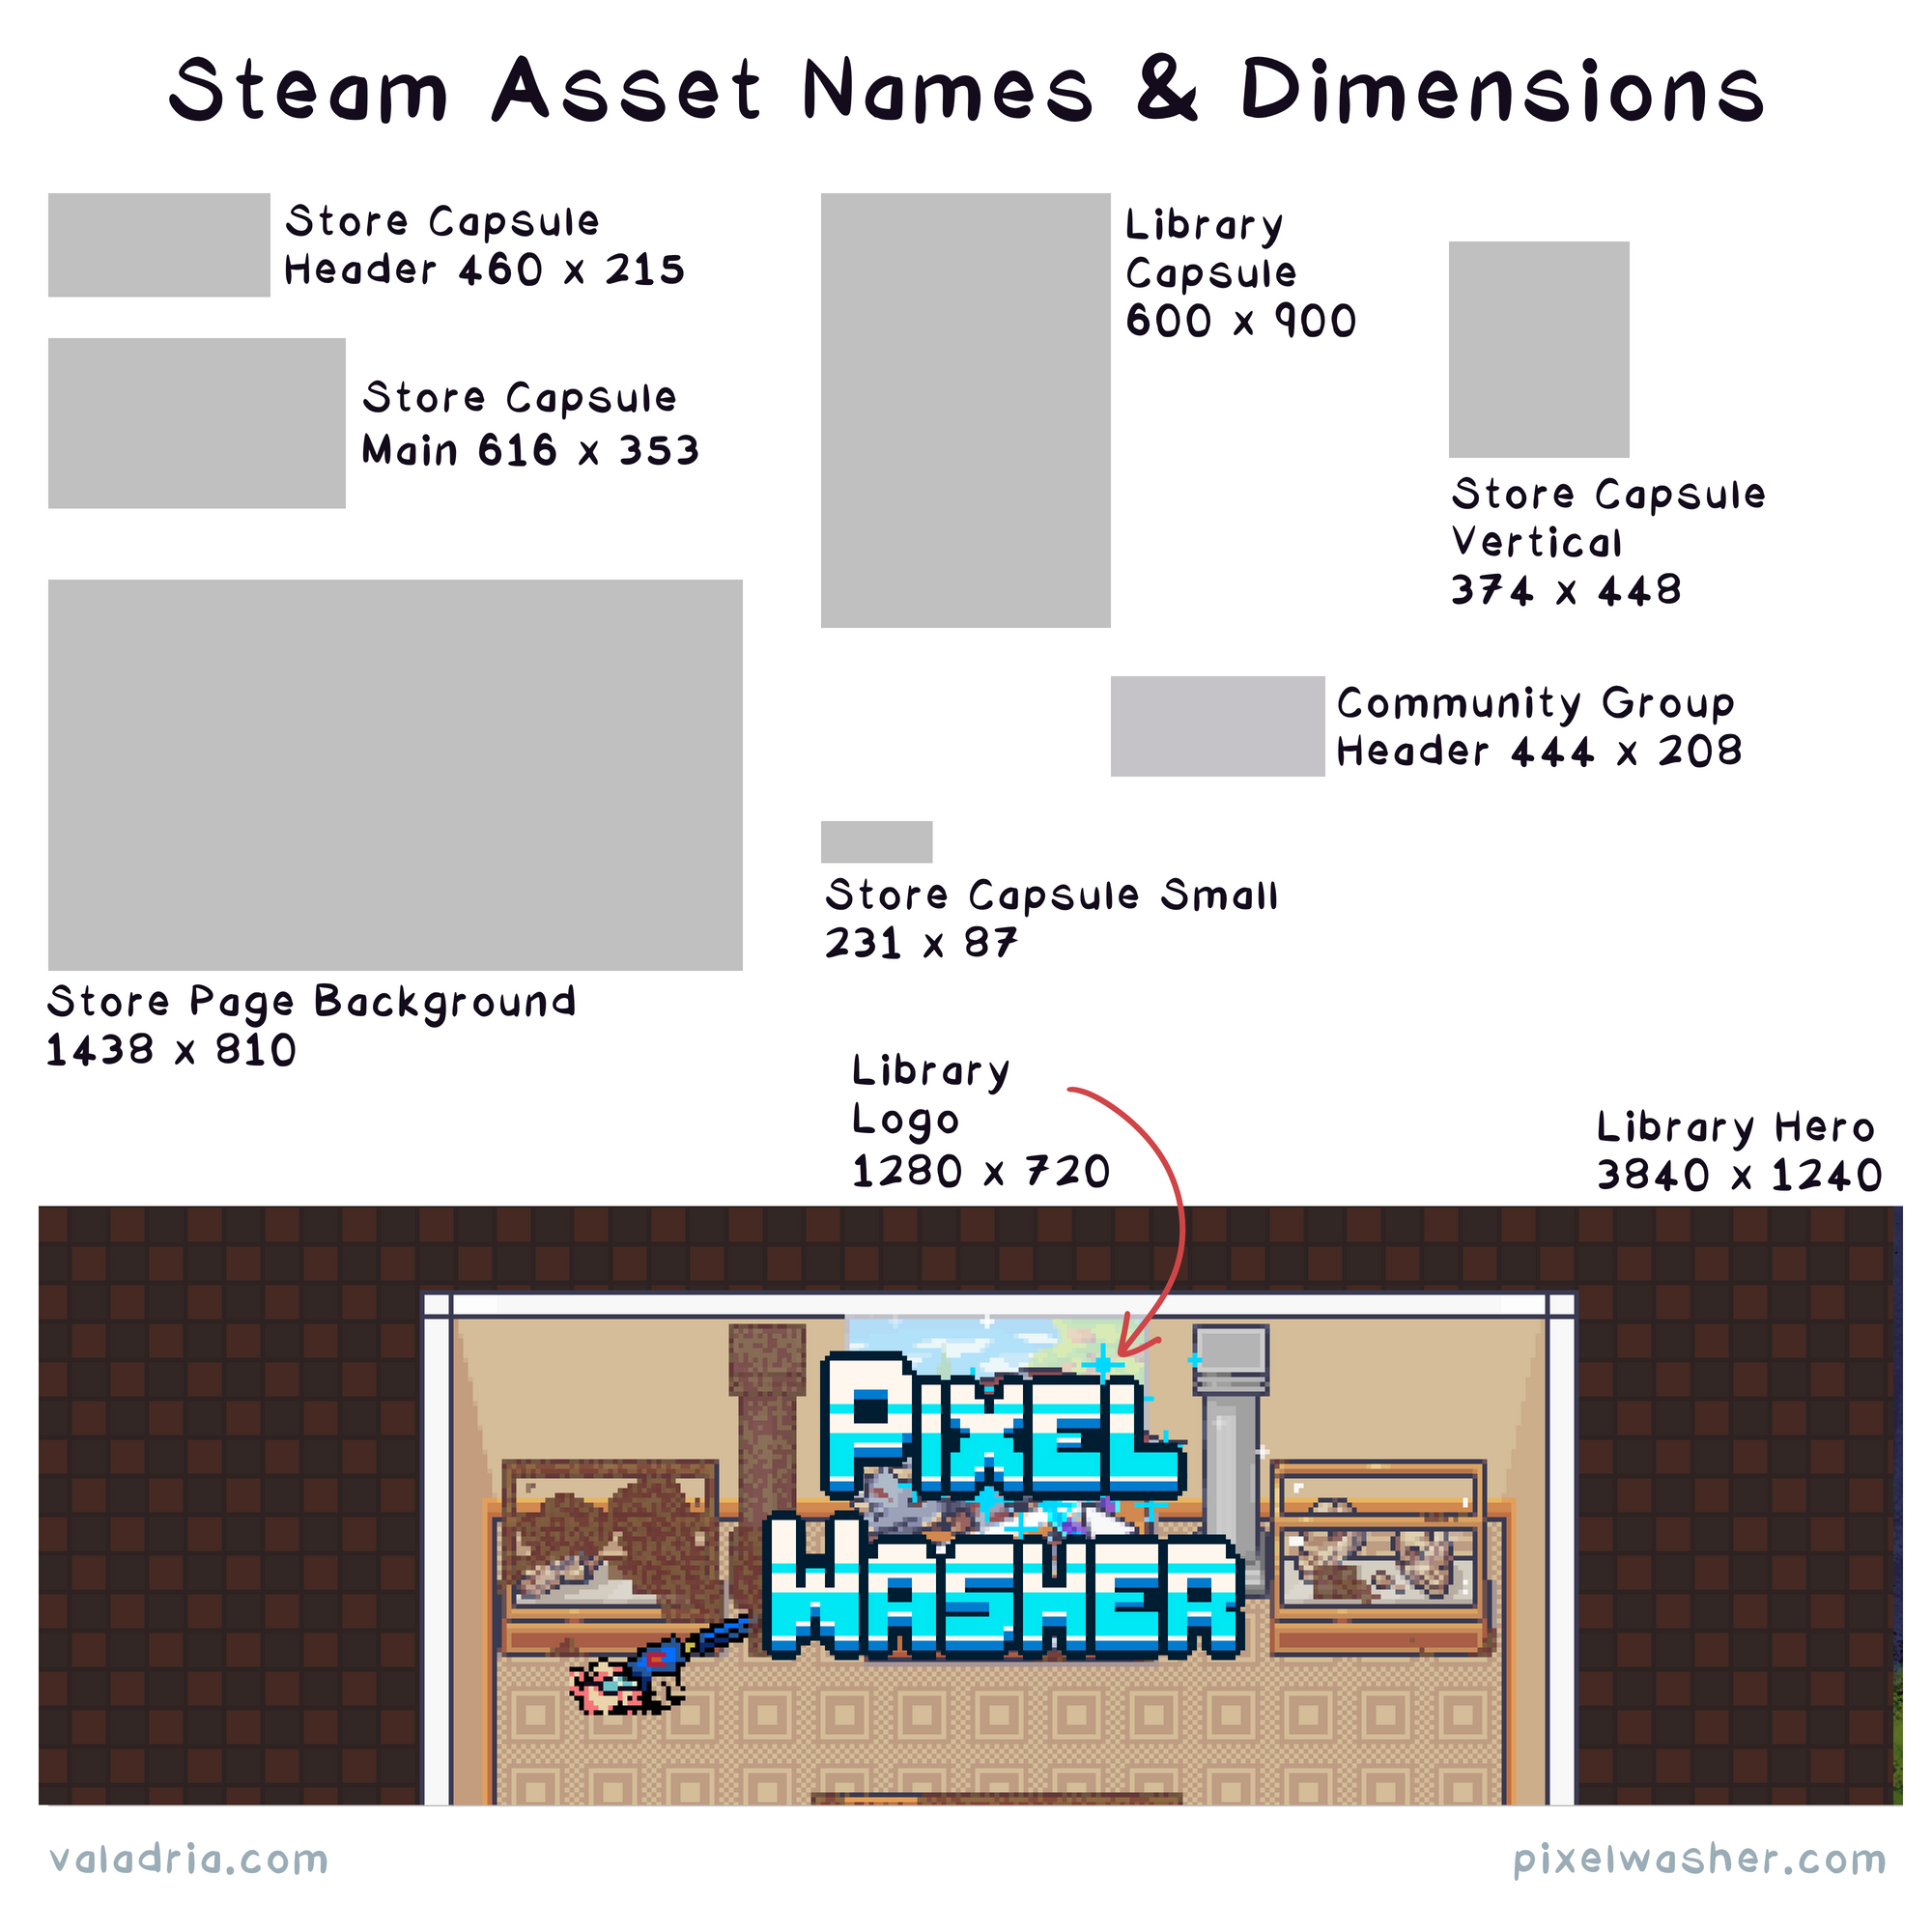 Steam Asset Names & Dimensions  Store Capsule Header 460 x 215 Store Capsule Main 616 x 353 Library Capsule 600 x 900 Store Page Background 1438 x 810 Community Group Header 444 x 208 Store Capsule Vertical 374 x 448 Store Capsule Small 231 x 87 Library Hero 3840 x 1240 Library Logo 1280 x 720  valadria.com @richtaur